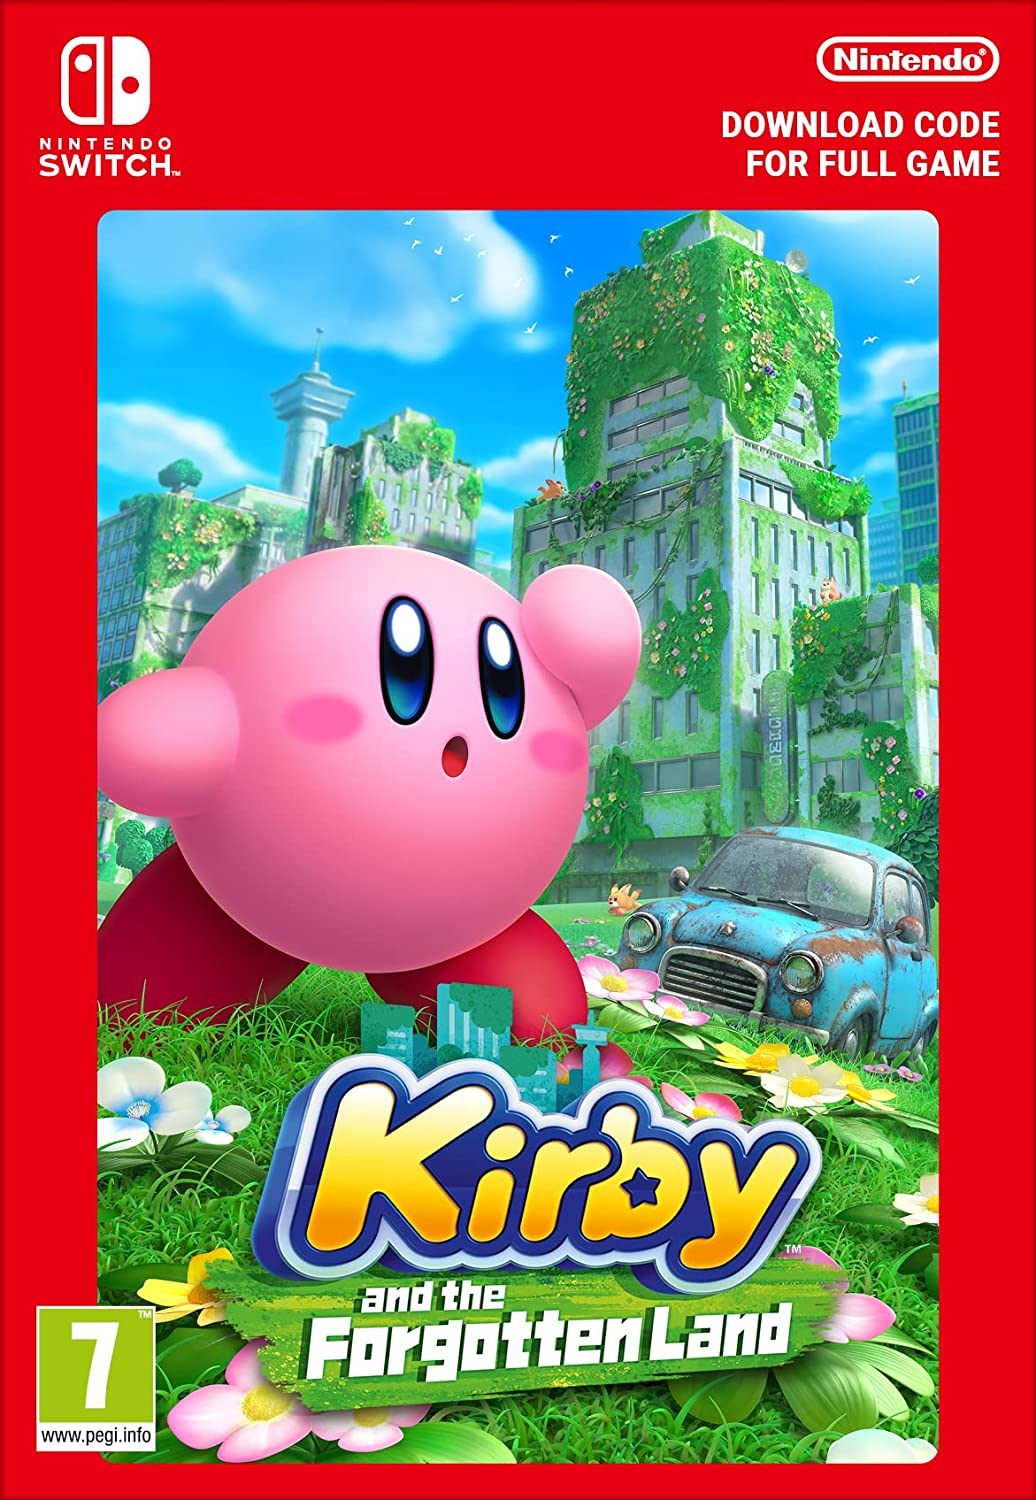 Nintendo land. Kirby Switch. Kirby and the Forgotten Land. Kirby and the Forgotten Land обложка.